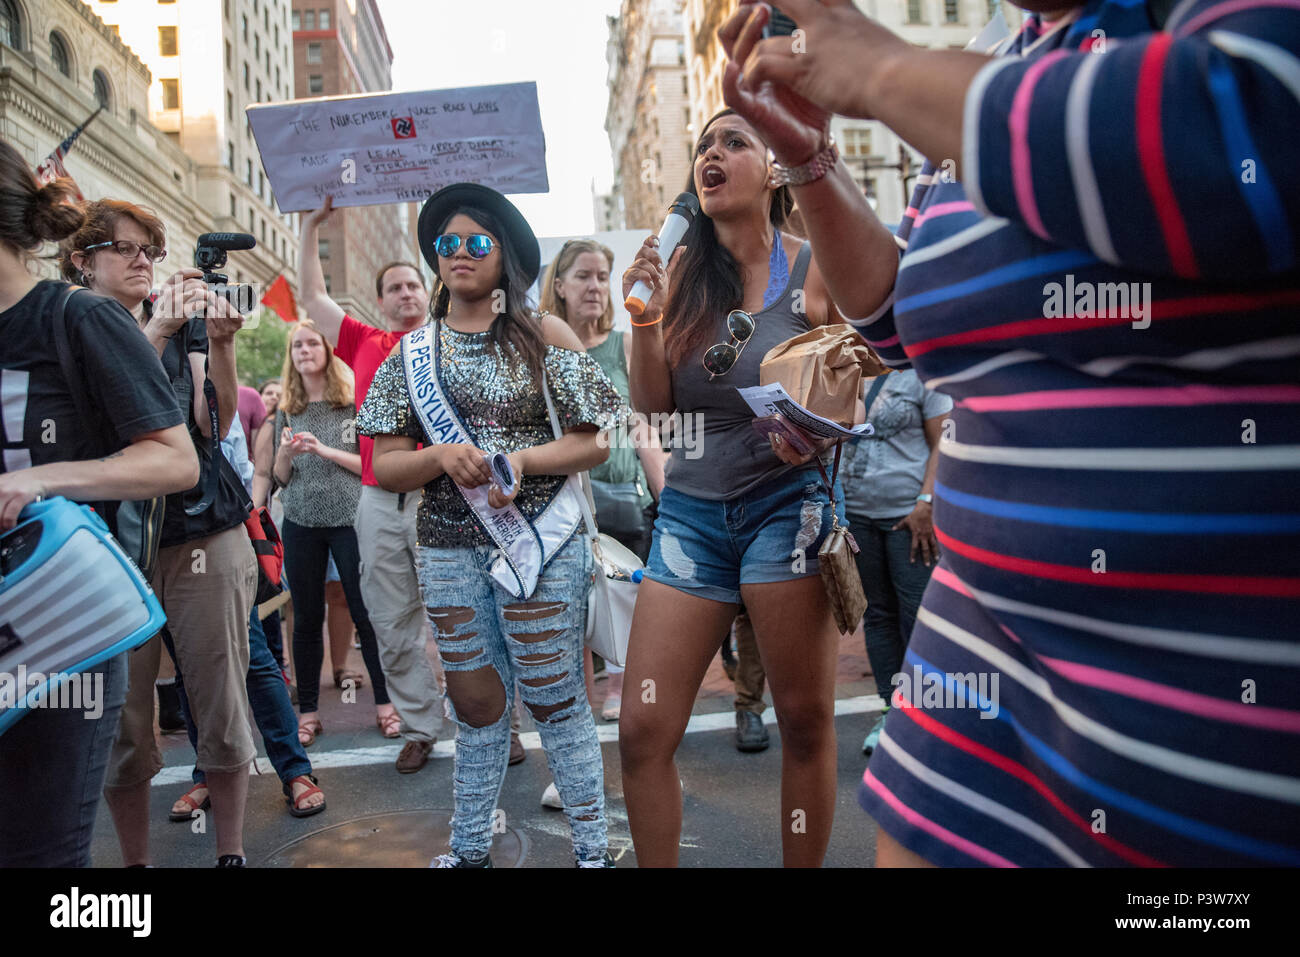 Philadelphia, Pennsylvania, USA. June 19 2018. Hundreds protested the arrival of Vice President Mike Pence at Rittenhouse Square demanding an end to forced separation of families at the southern border. Credit: Chris Baker Evens. Credit: Christopher Evens/Alamy Live News Stock Photo